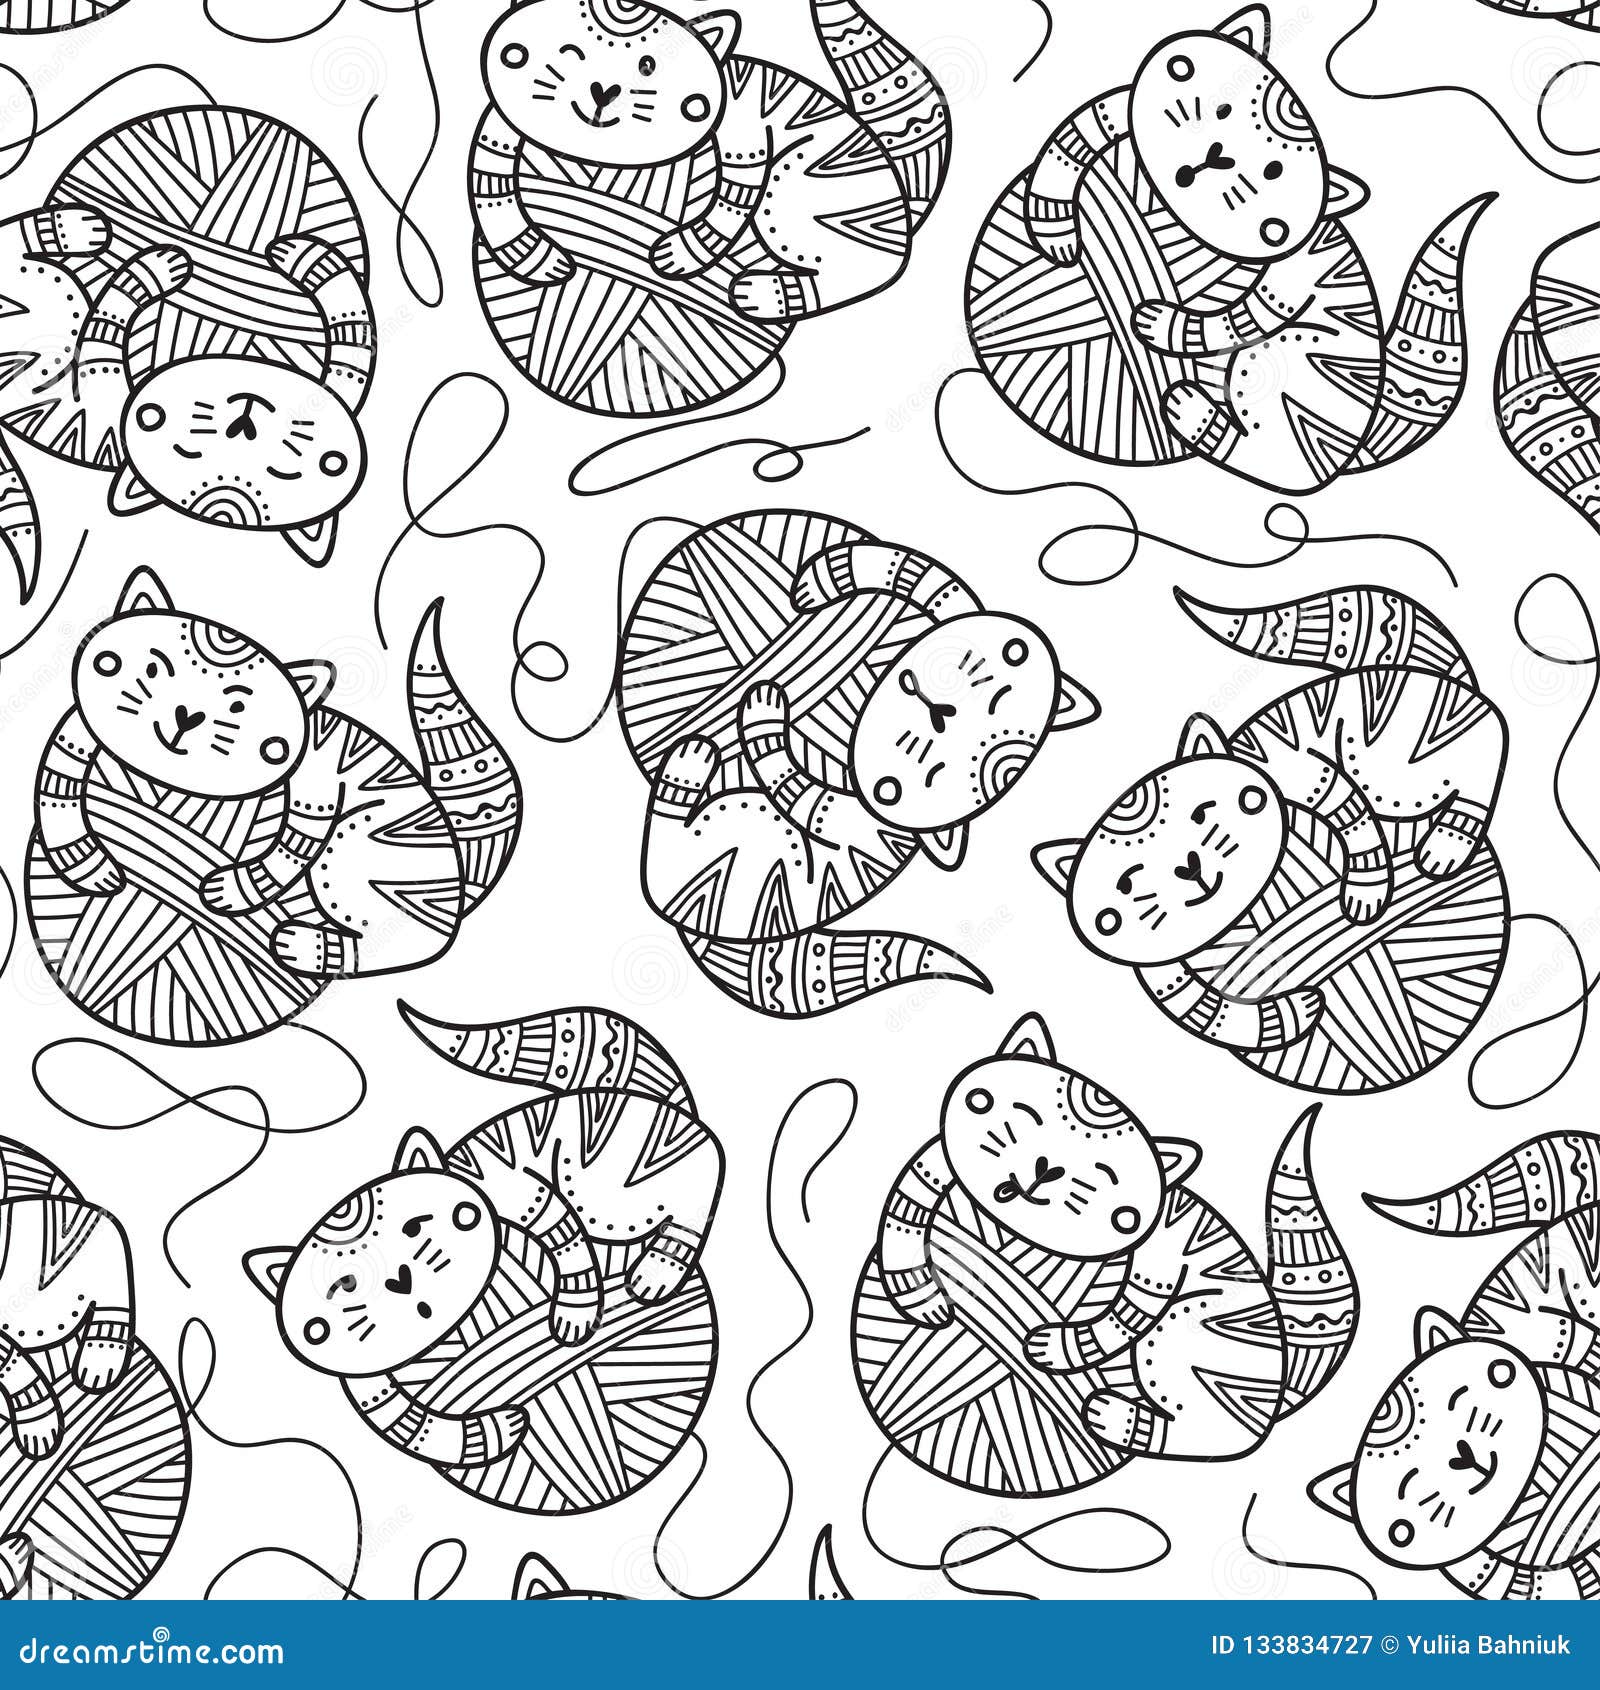 Kitten Yarn Ball Coloring Page Stock Illustrations 31 Kitten Yarn Ball Coloring Page Stock Illustrations Vectors Clipart Dreamstime